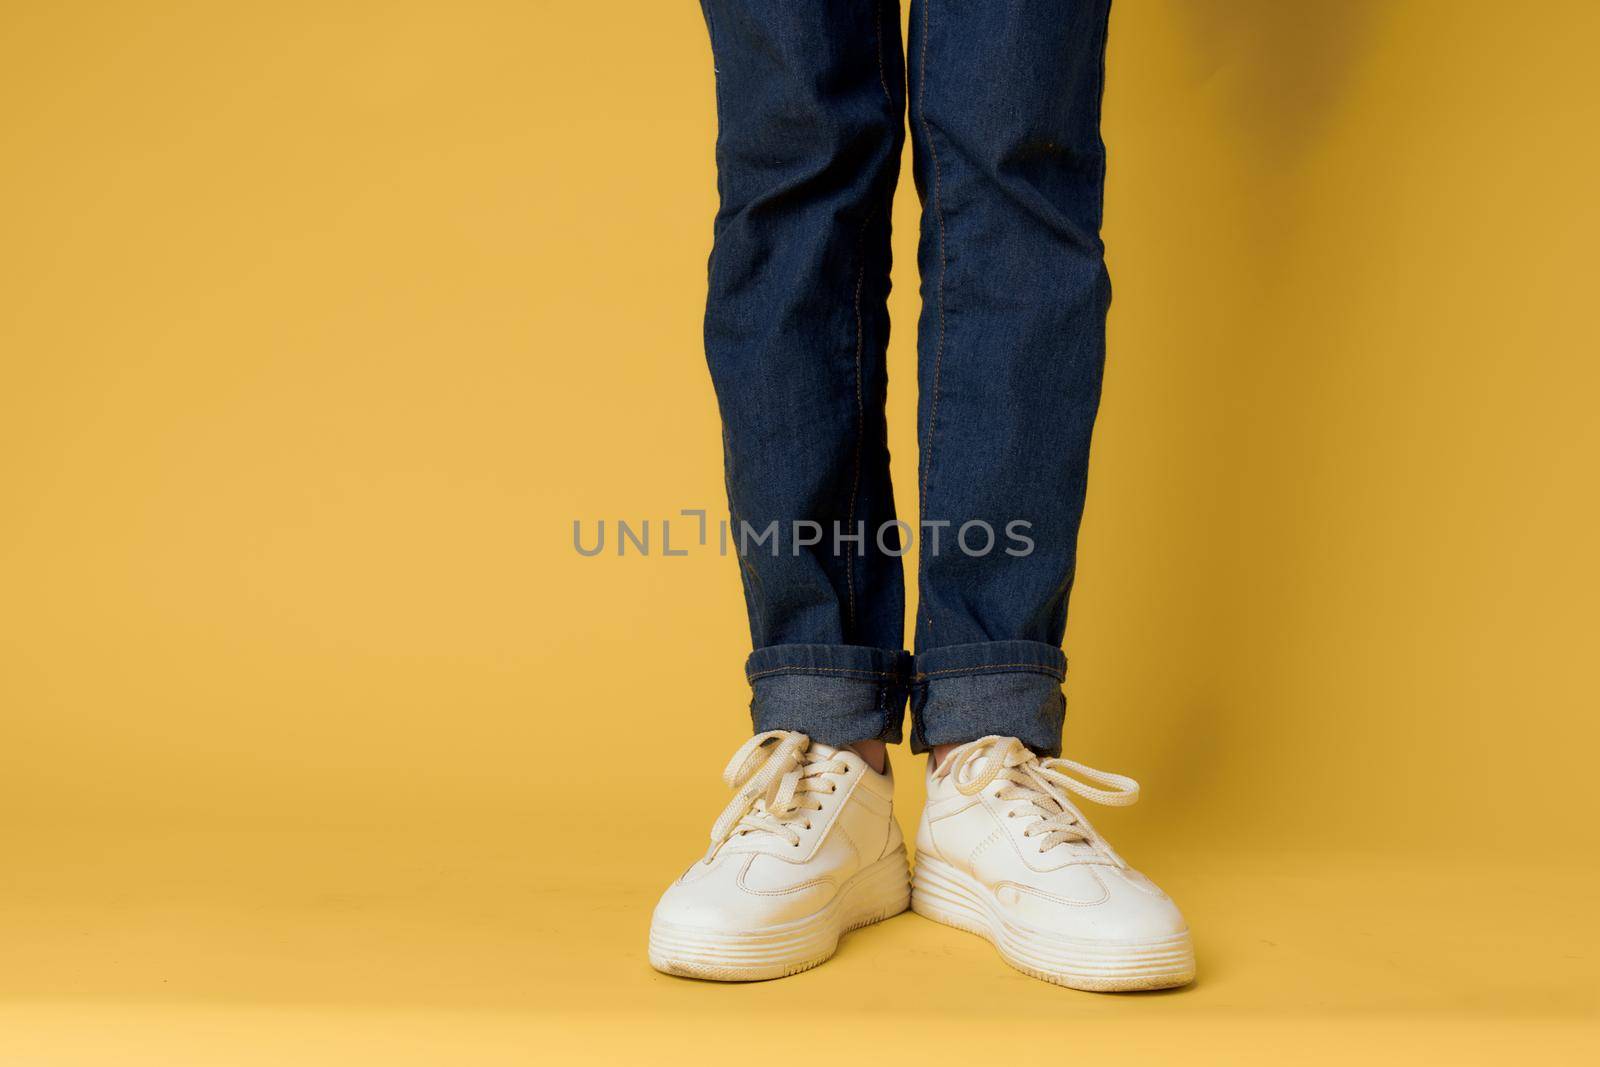 feet jeans fashion shoes white sneakers yellow background by SHOTPRIME